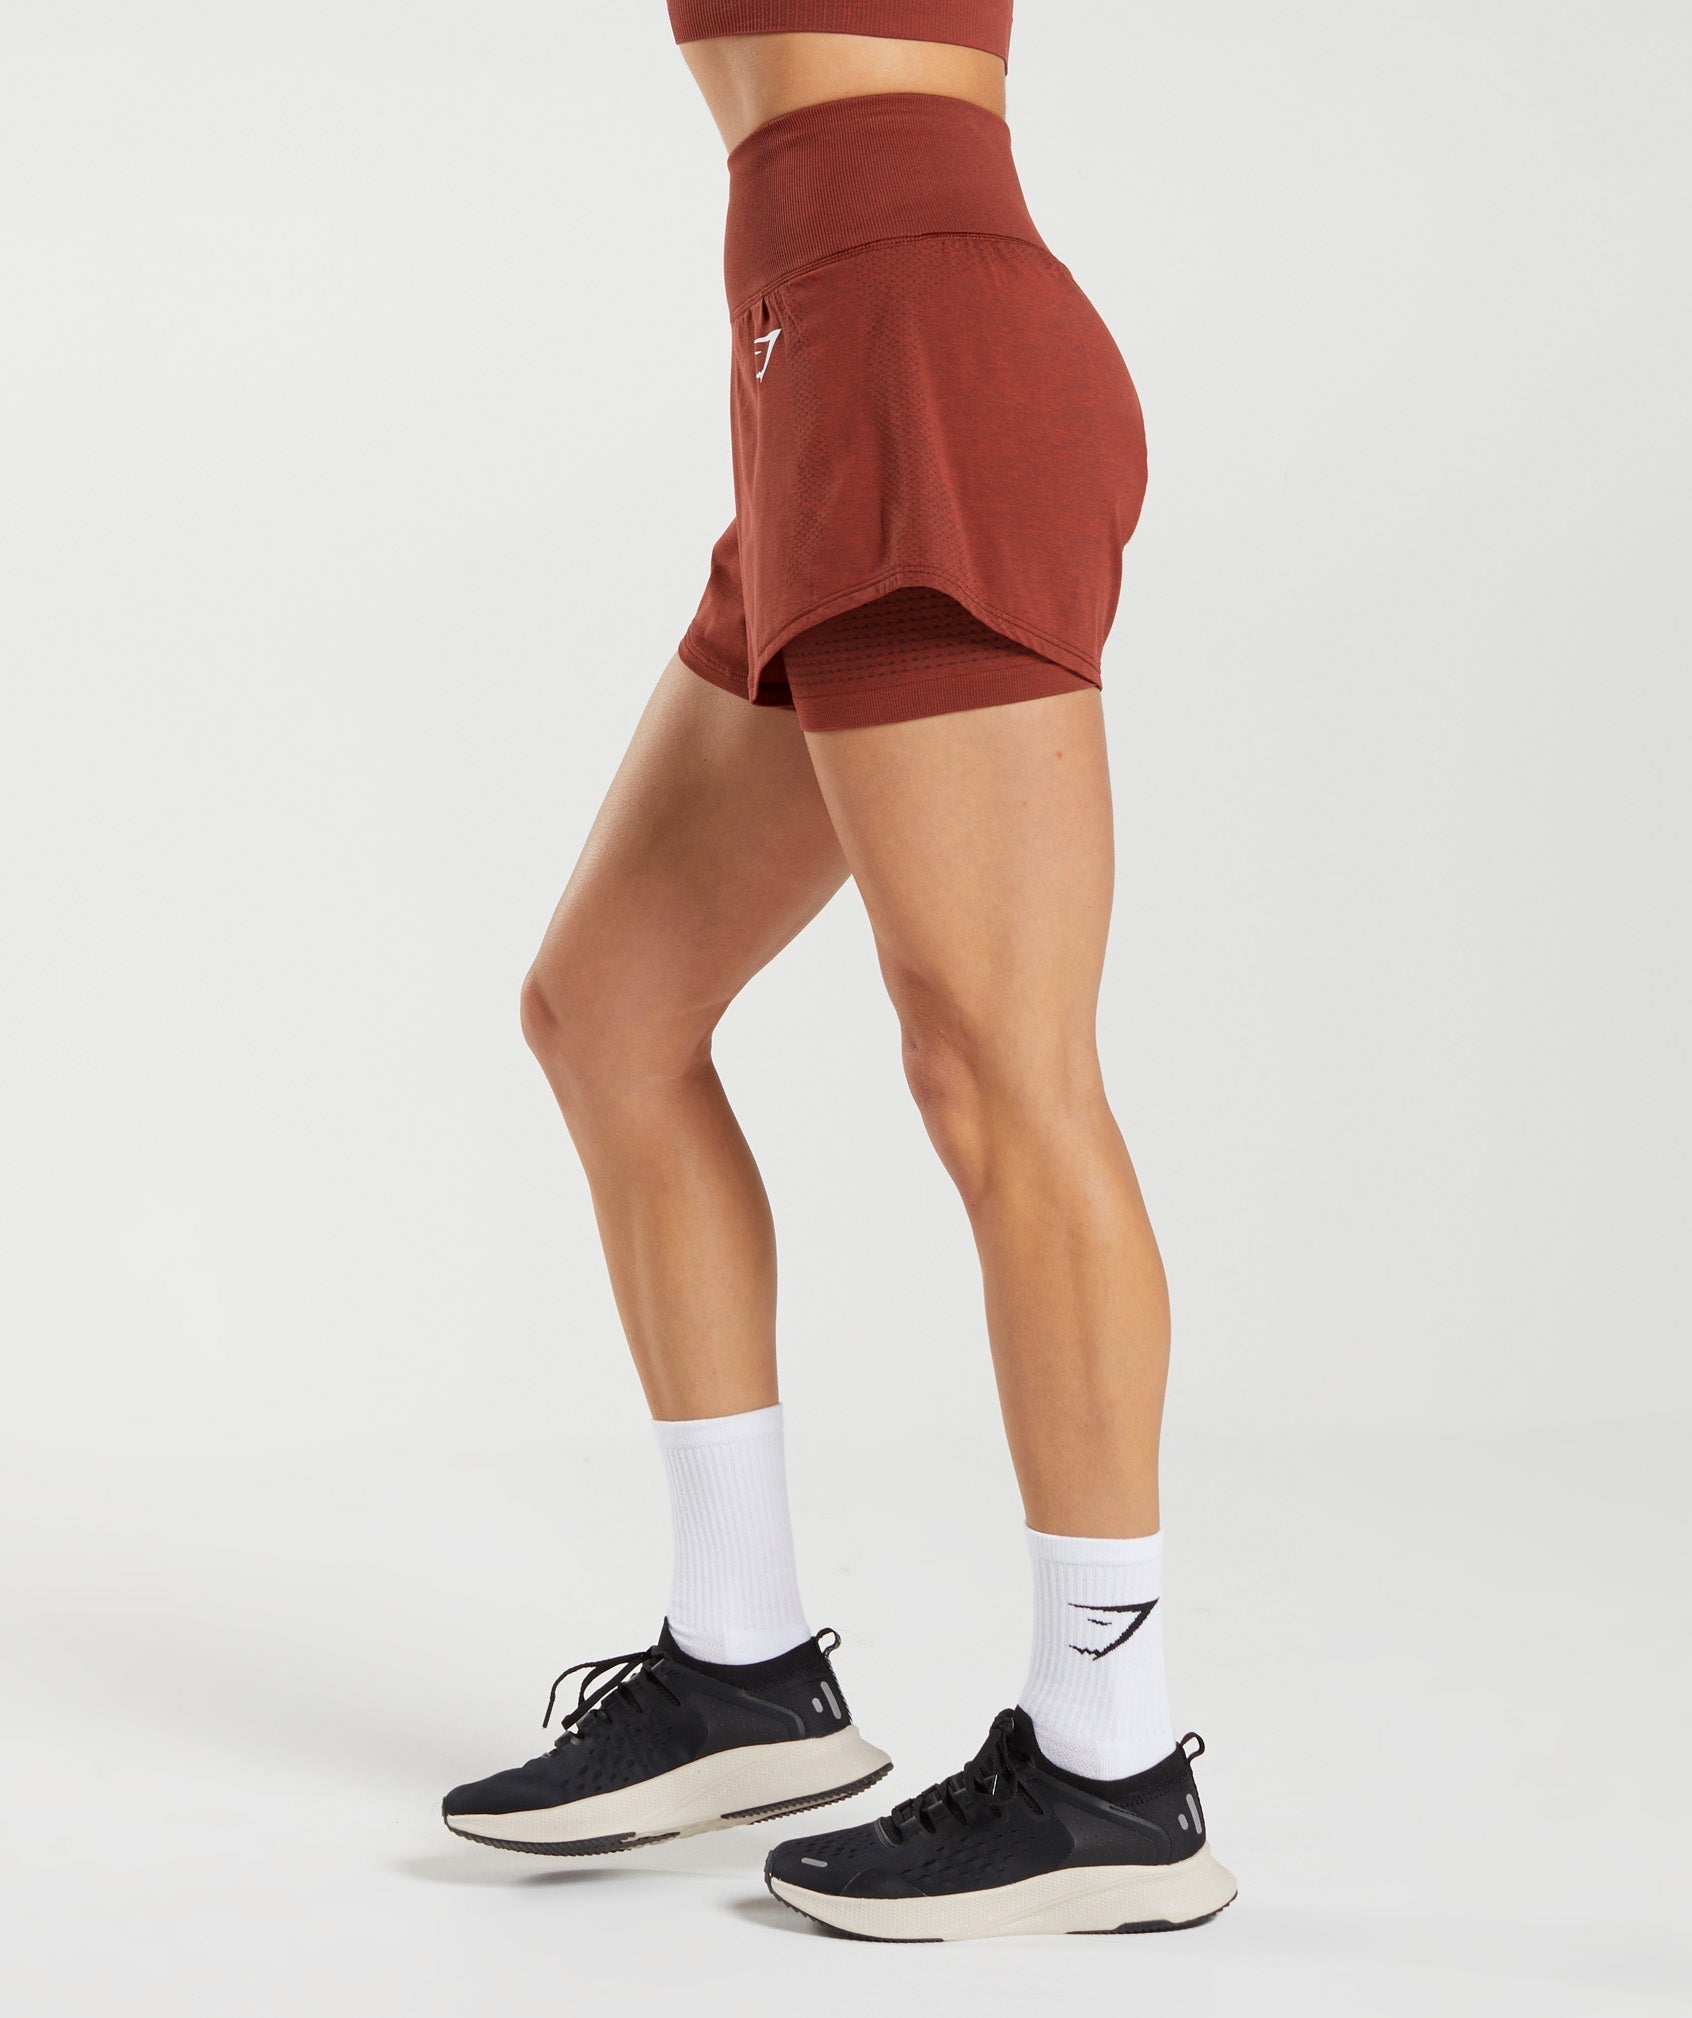 Vital Seamless 2.0 2-in-1 Shorts in Brick Red Marl - view 3